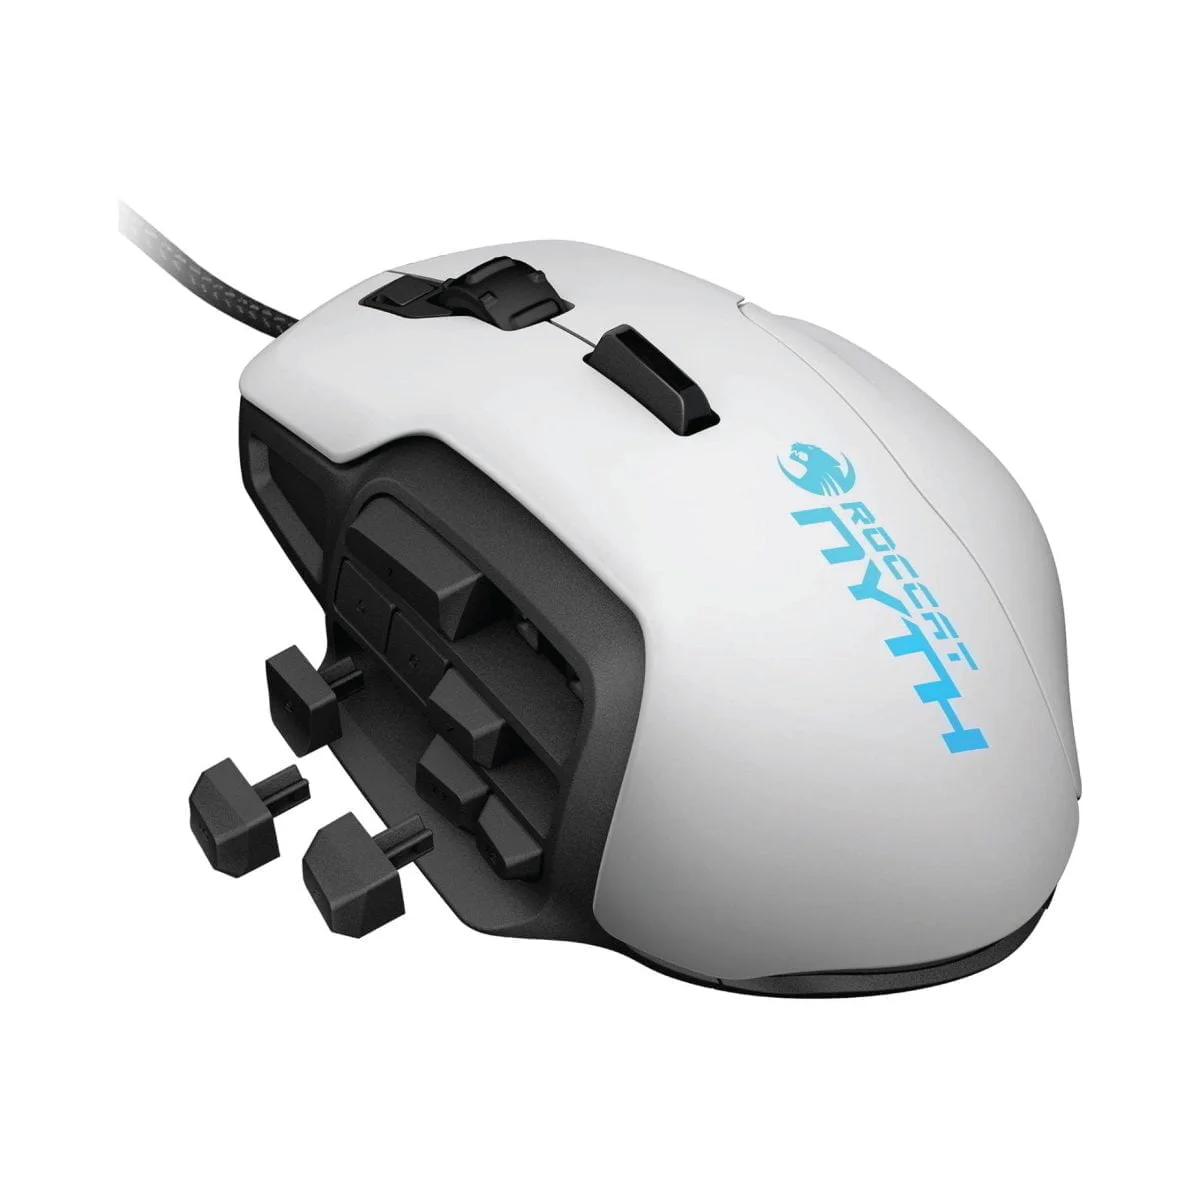 64D 02 Scaled Roccat &Lt;Div Id=&Quot;Shopify-Section-Product-Template&Quot; Class=&Quot;Shopify-Section&Quot;&Gt; &Lt;Div Id=&Quot;Productsection-Product-Template&Quot; Class=&Quot;Product-Template__Container Page-Width&Quot; Data-Section-Id=&Quot;Product-Template&Quot; Data-Section-Type=&Quot;Product&Quot; Data-Enable-History-State=&Quot;True&Quot; Data-Ajax-Enabled=&Quot;True&Quot;&Gt; &Lt;Div Class=&Quot;Grid Product-Single Product-Single--Medium-Media&Quot;&Gt; &Lt;Div Class=&Quot;Grid__Item Medium-Up--One-Half&Quot;&Gt; &Lt;Div Class=&Quot;Product-Single__Description Rte&Quot;&Gt; The Roccat Nyth Is A Customizable 18-Button Mmo Gaming Mouse With A Laser Sensor With Up To 12.000 Dpi. Order Yours Today. &Nbsp; &Lt;/Div&Gt; &Lt;/Div&Gt; &Lt;/Div&Gt; &Lt;/Div&Gt; &Lt;/Div&Gt; Https://Youtu.be/5Pwxxksrsty Roccat Roccat Nyth Modular Mmo Gaming Mouse, White